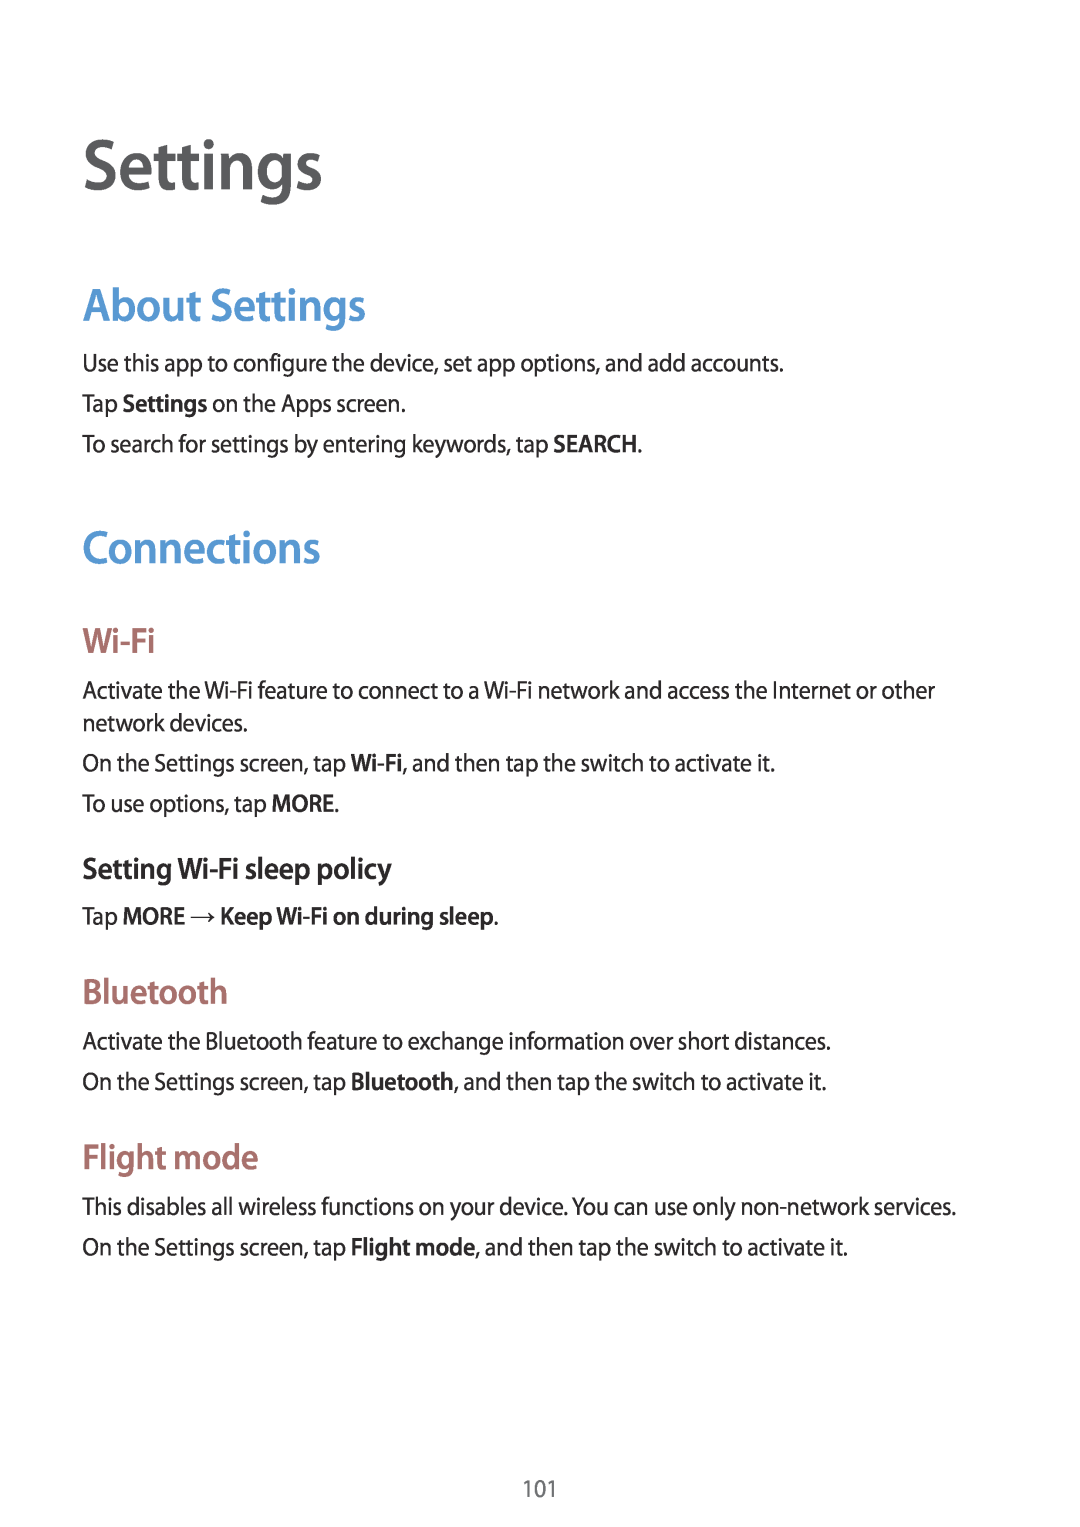 Samsung SM-P550NZAEKOO manual About Settings, Connections, Bluetooth, Flight mode, Setting Wi-Fi sleep policy 